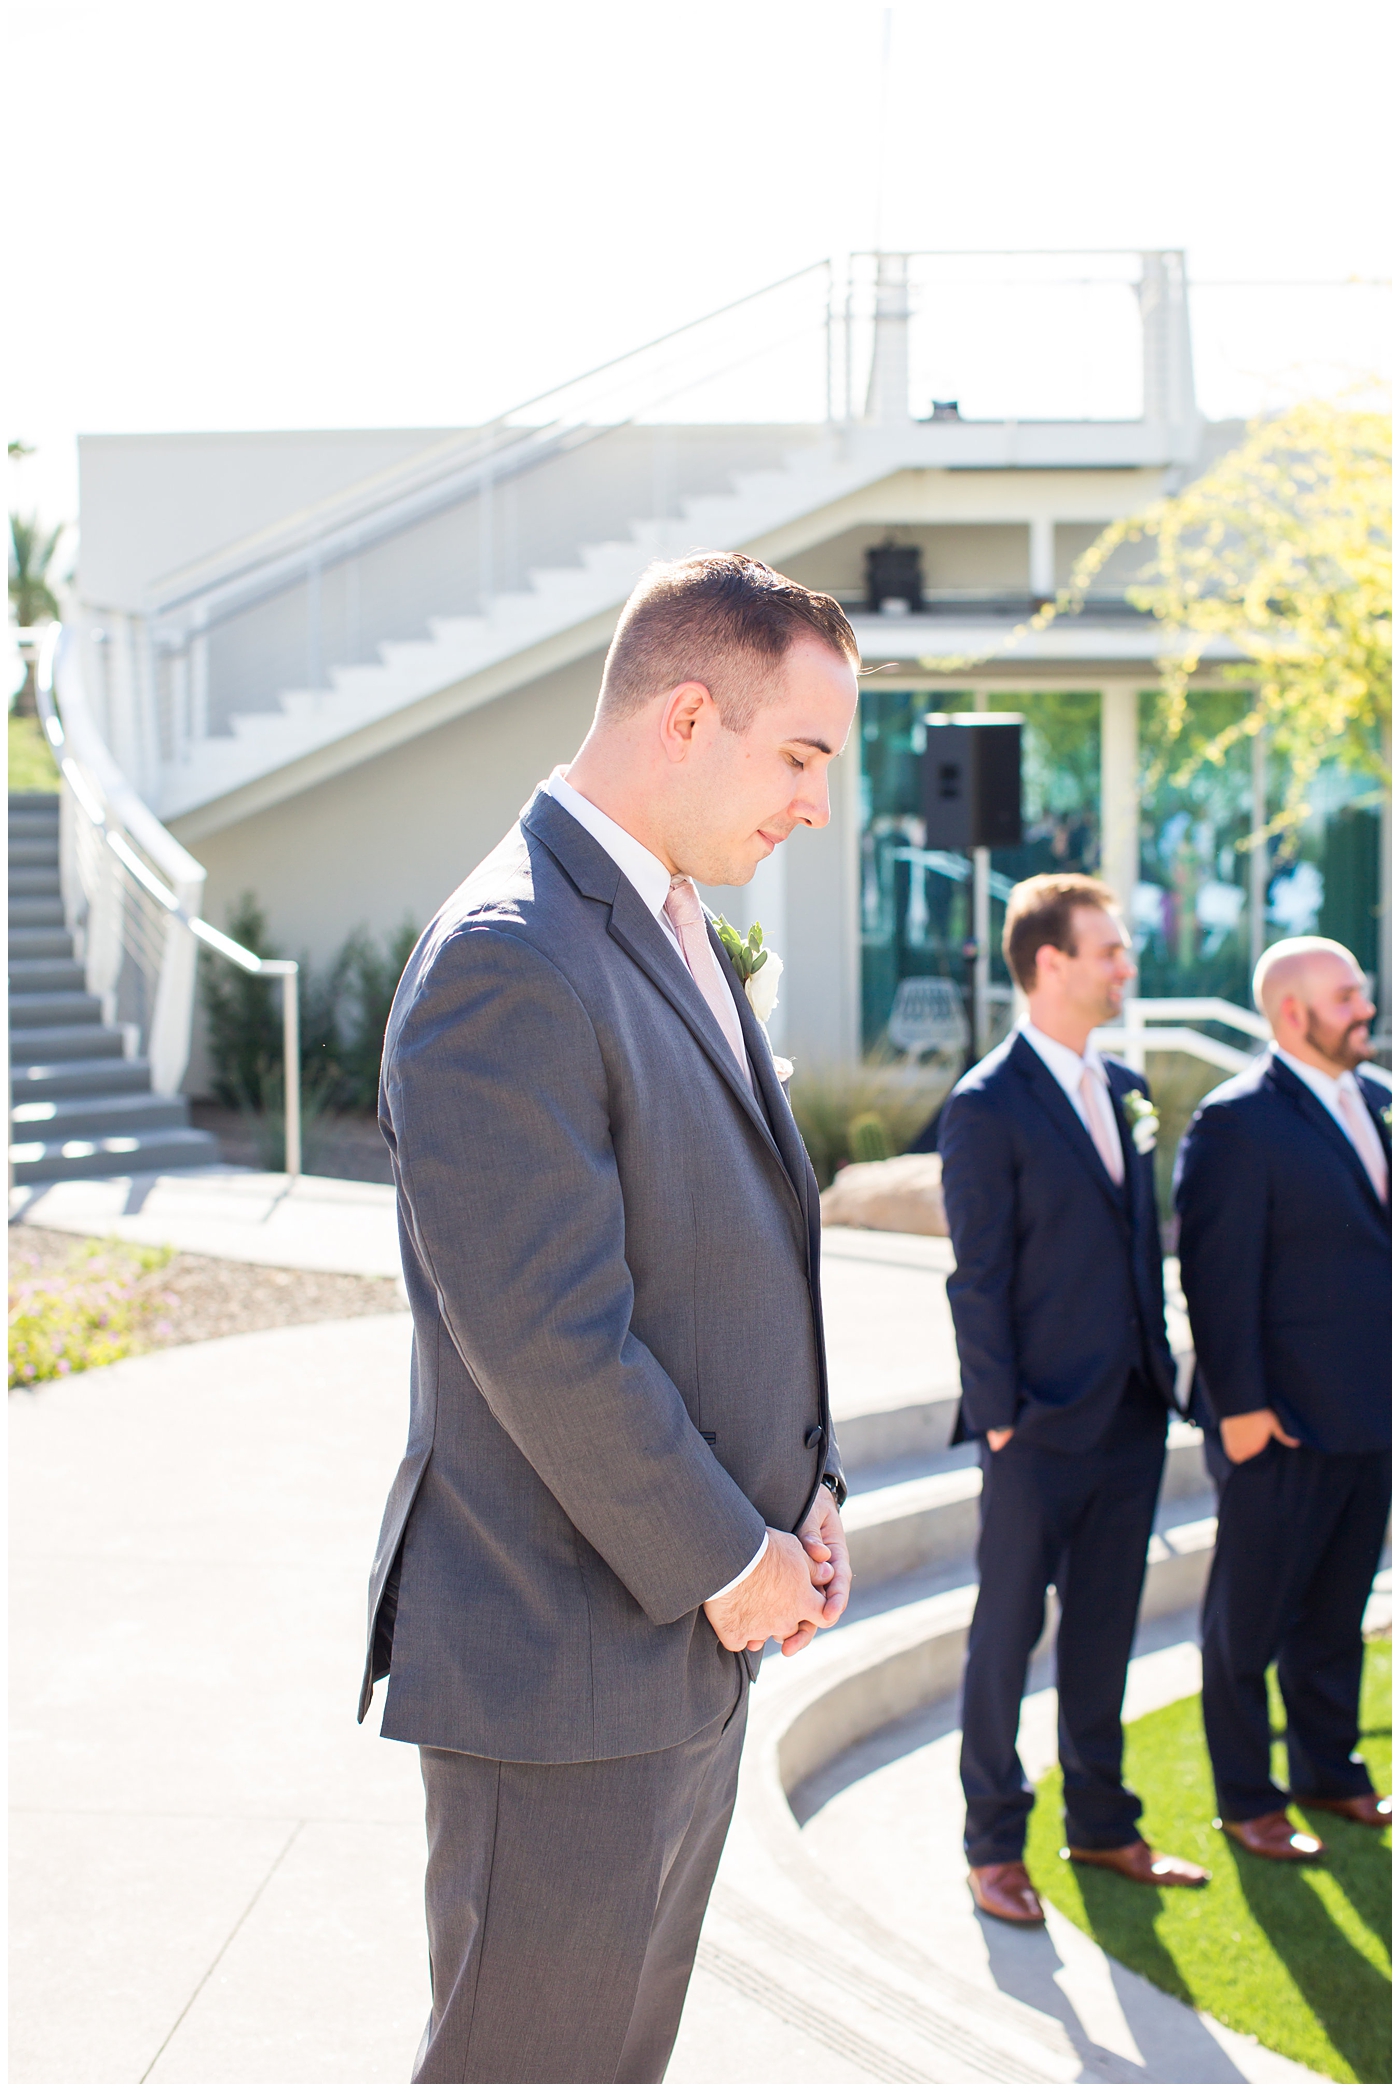 groom in gray suit with pink tie and ranunculus boutonniere waiting for bride to walk down the aisle at outdoor wedding ceremony